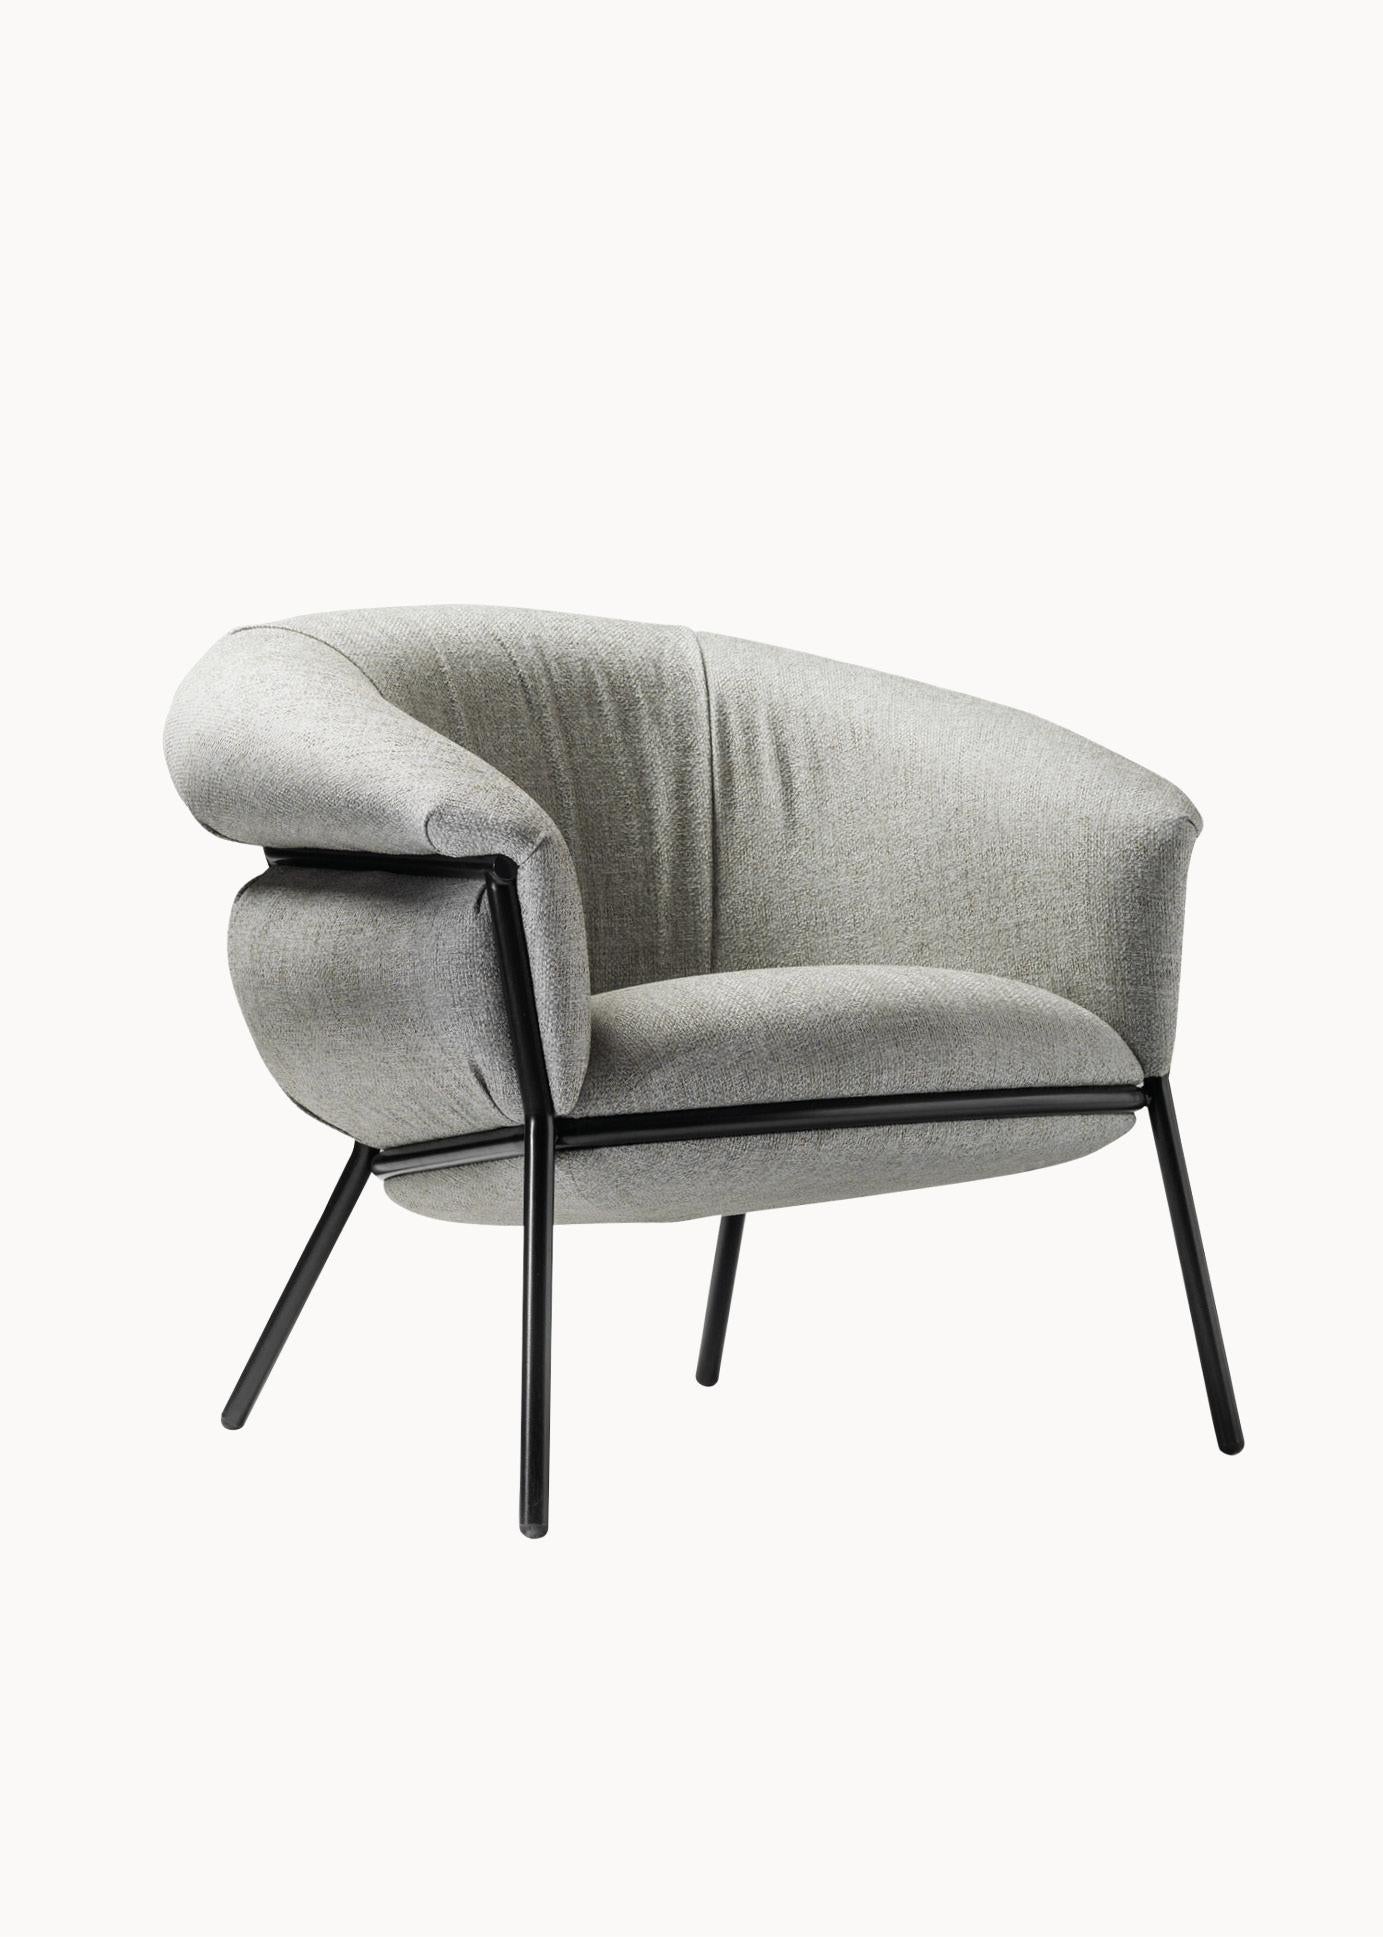 Steel Grasso Armchair by Stephen Burks padded grey curved upholstery black structure For Sale